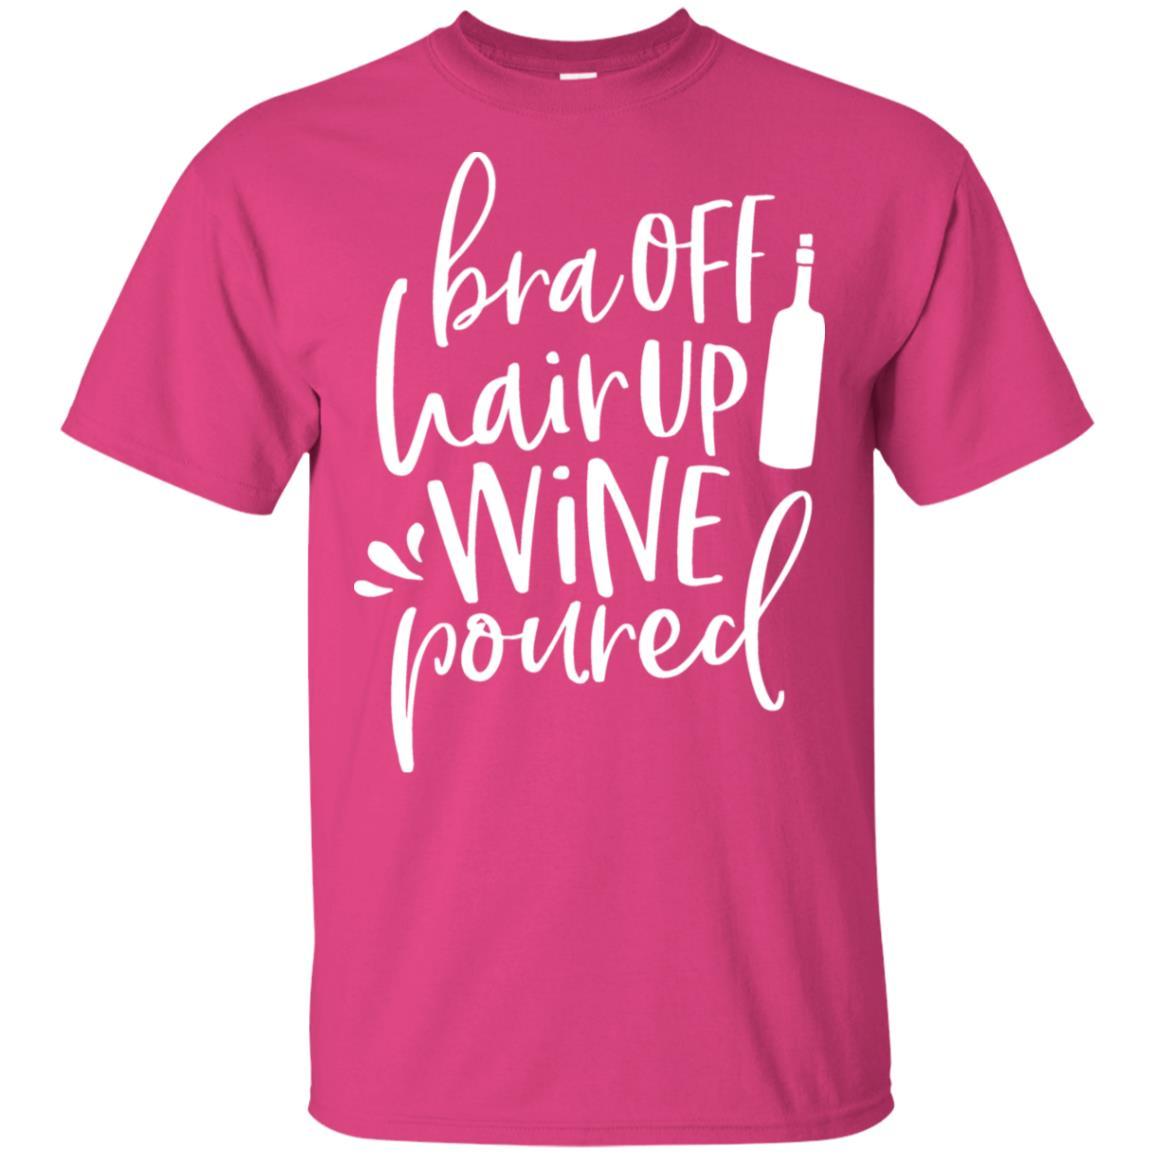 T-Shirts Heliconia / S WineyBitches.Co Bra Off Hair Up Wine Poured Ultra Cotton T-Shirt (Wht Lettering) WineyBitchesCo